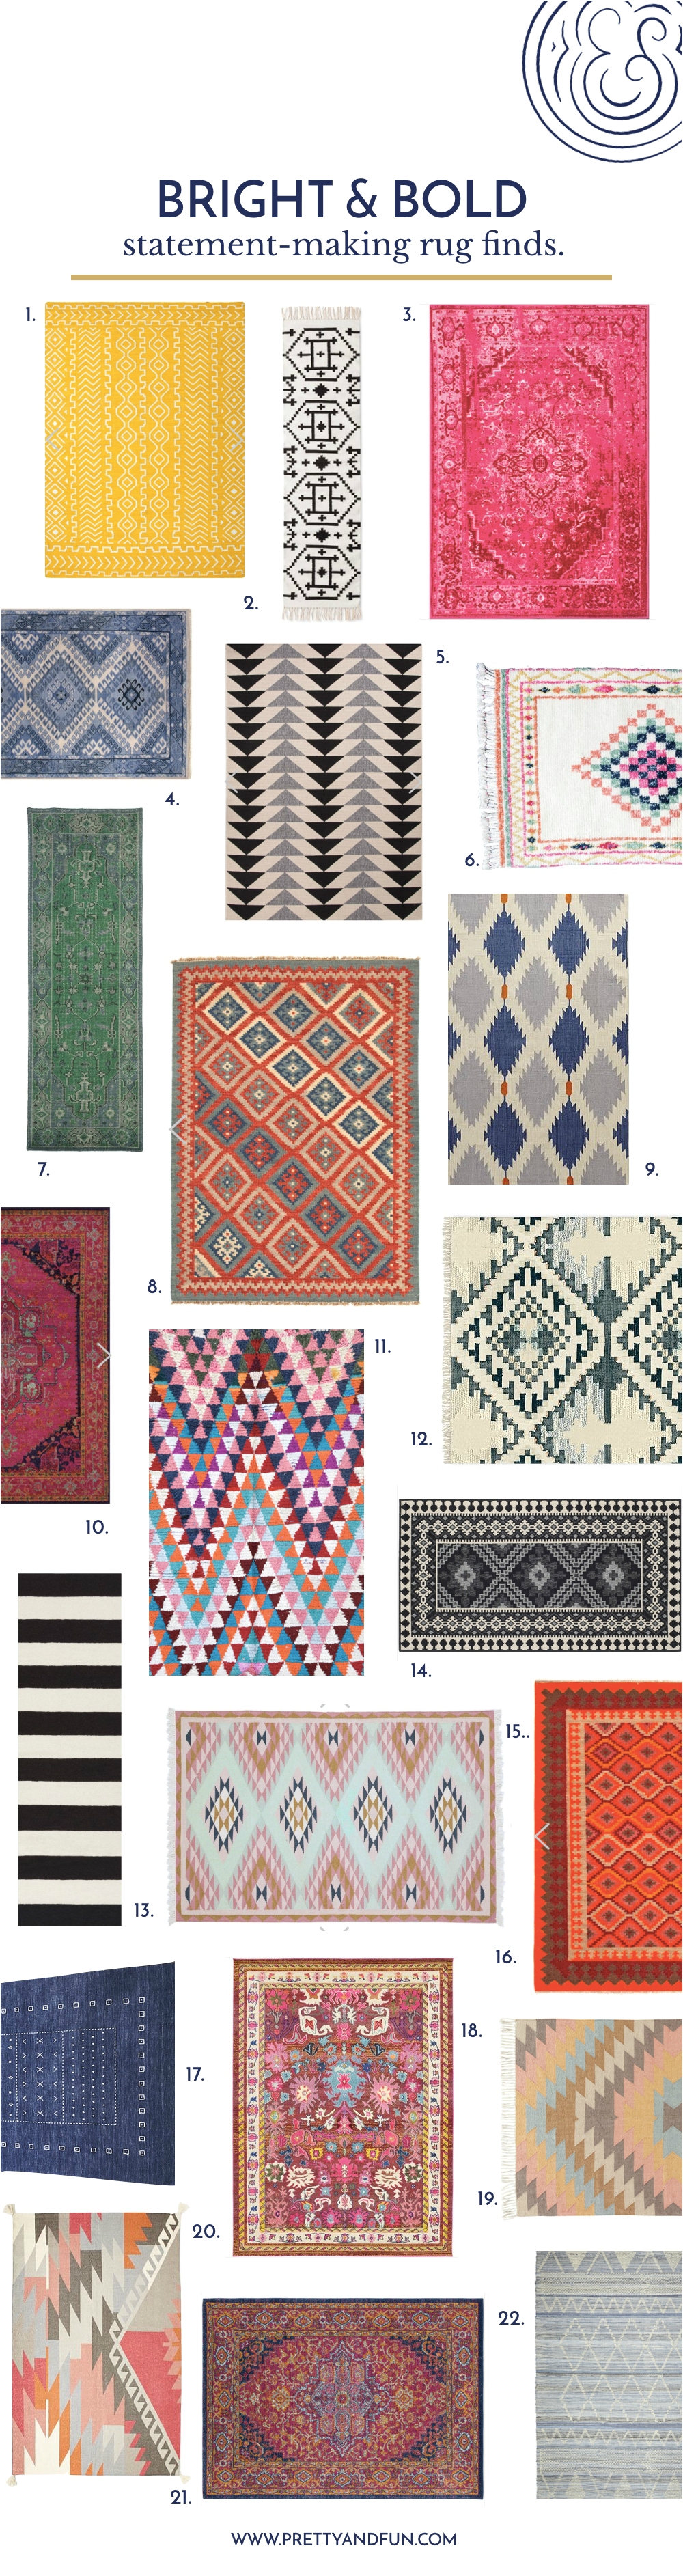 22 bold rugs that make a statement